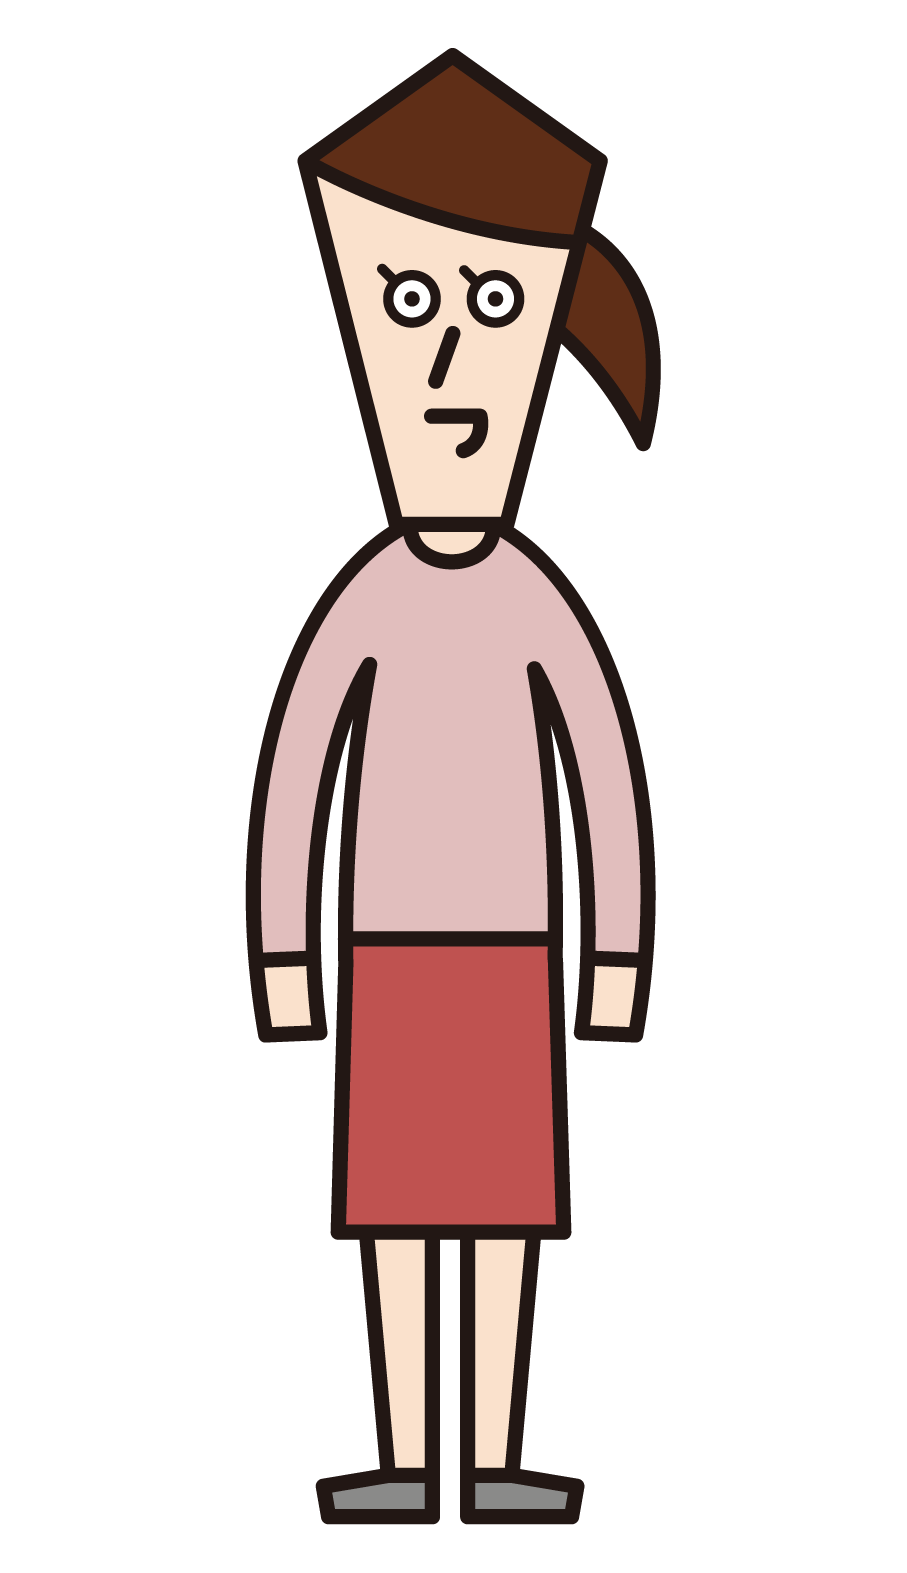 Illustration of an upright person (woman)